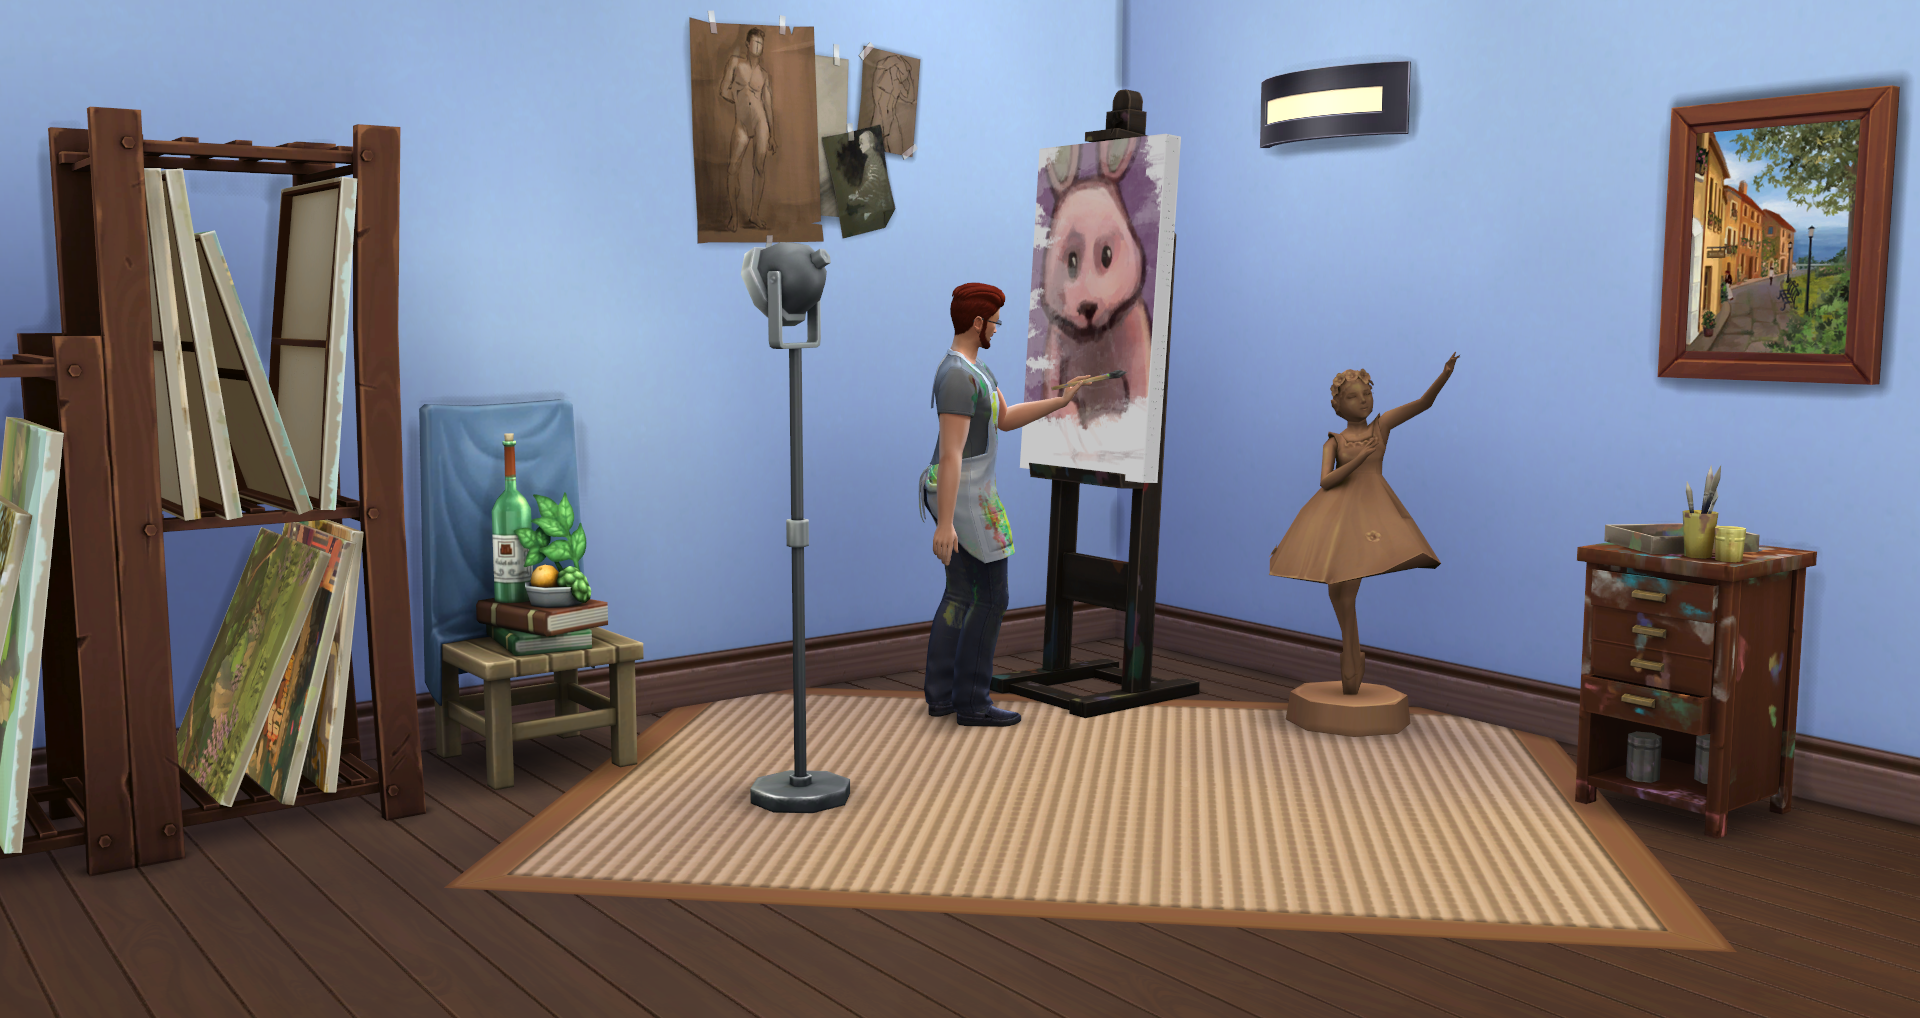 The Sims 4 Painter Career Guide | SimsVIP